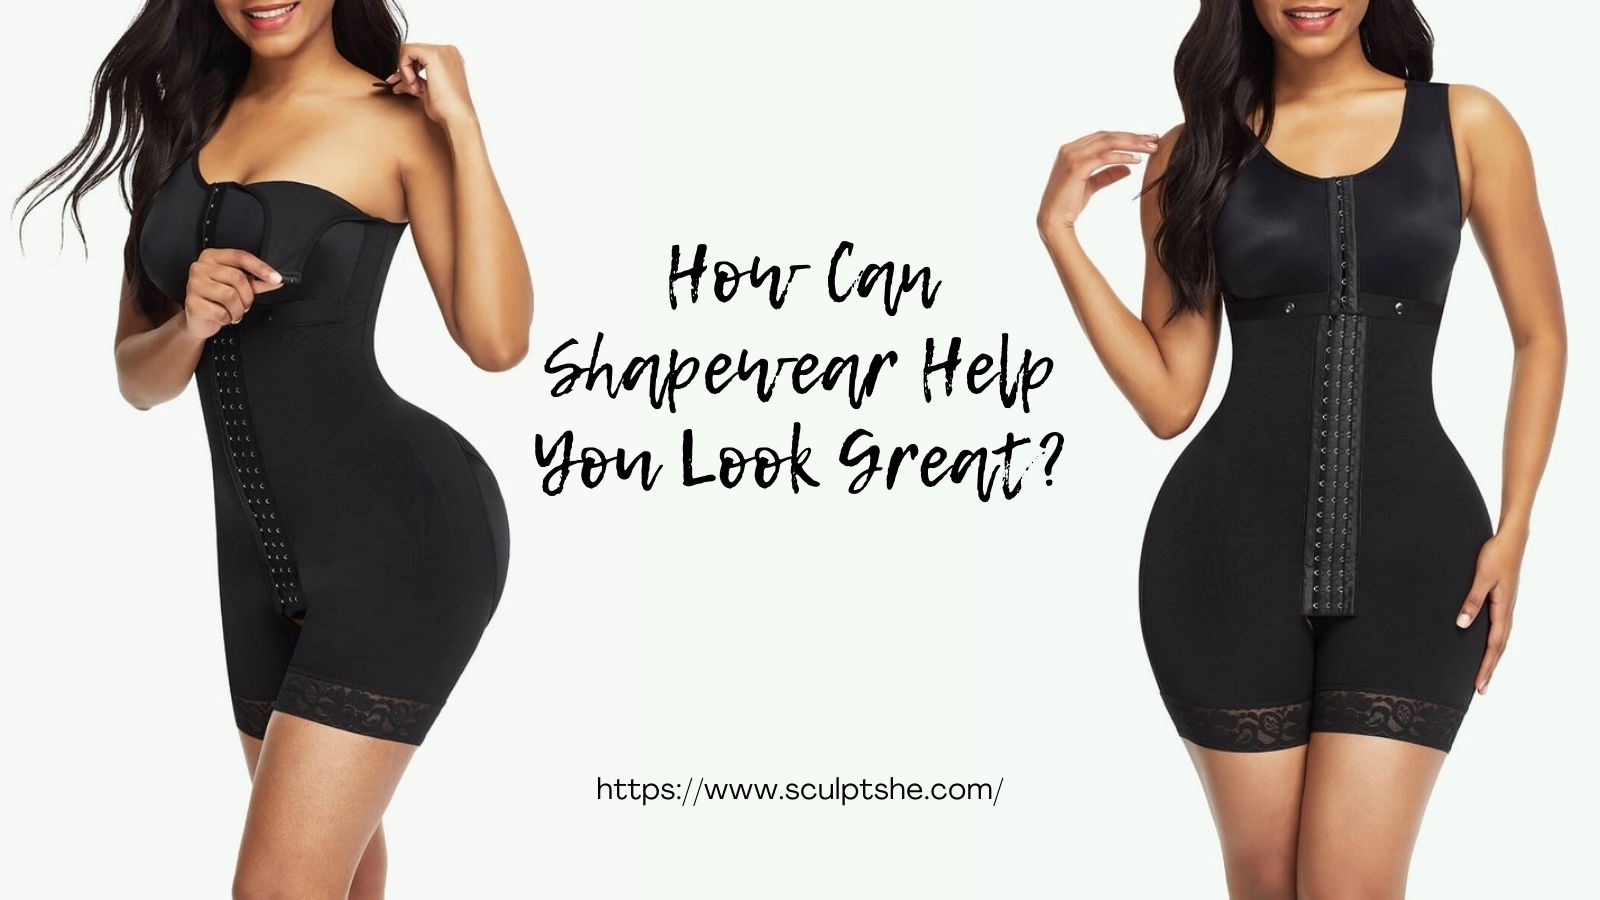 How Can Shapewear Help You Look Great?